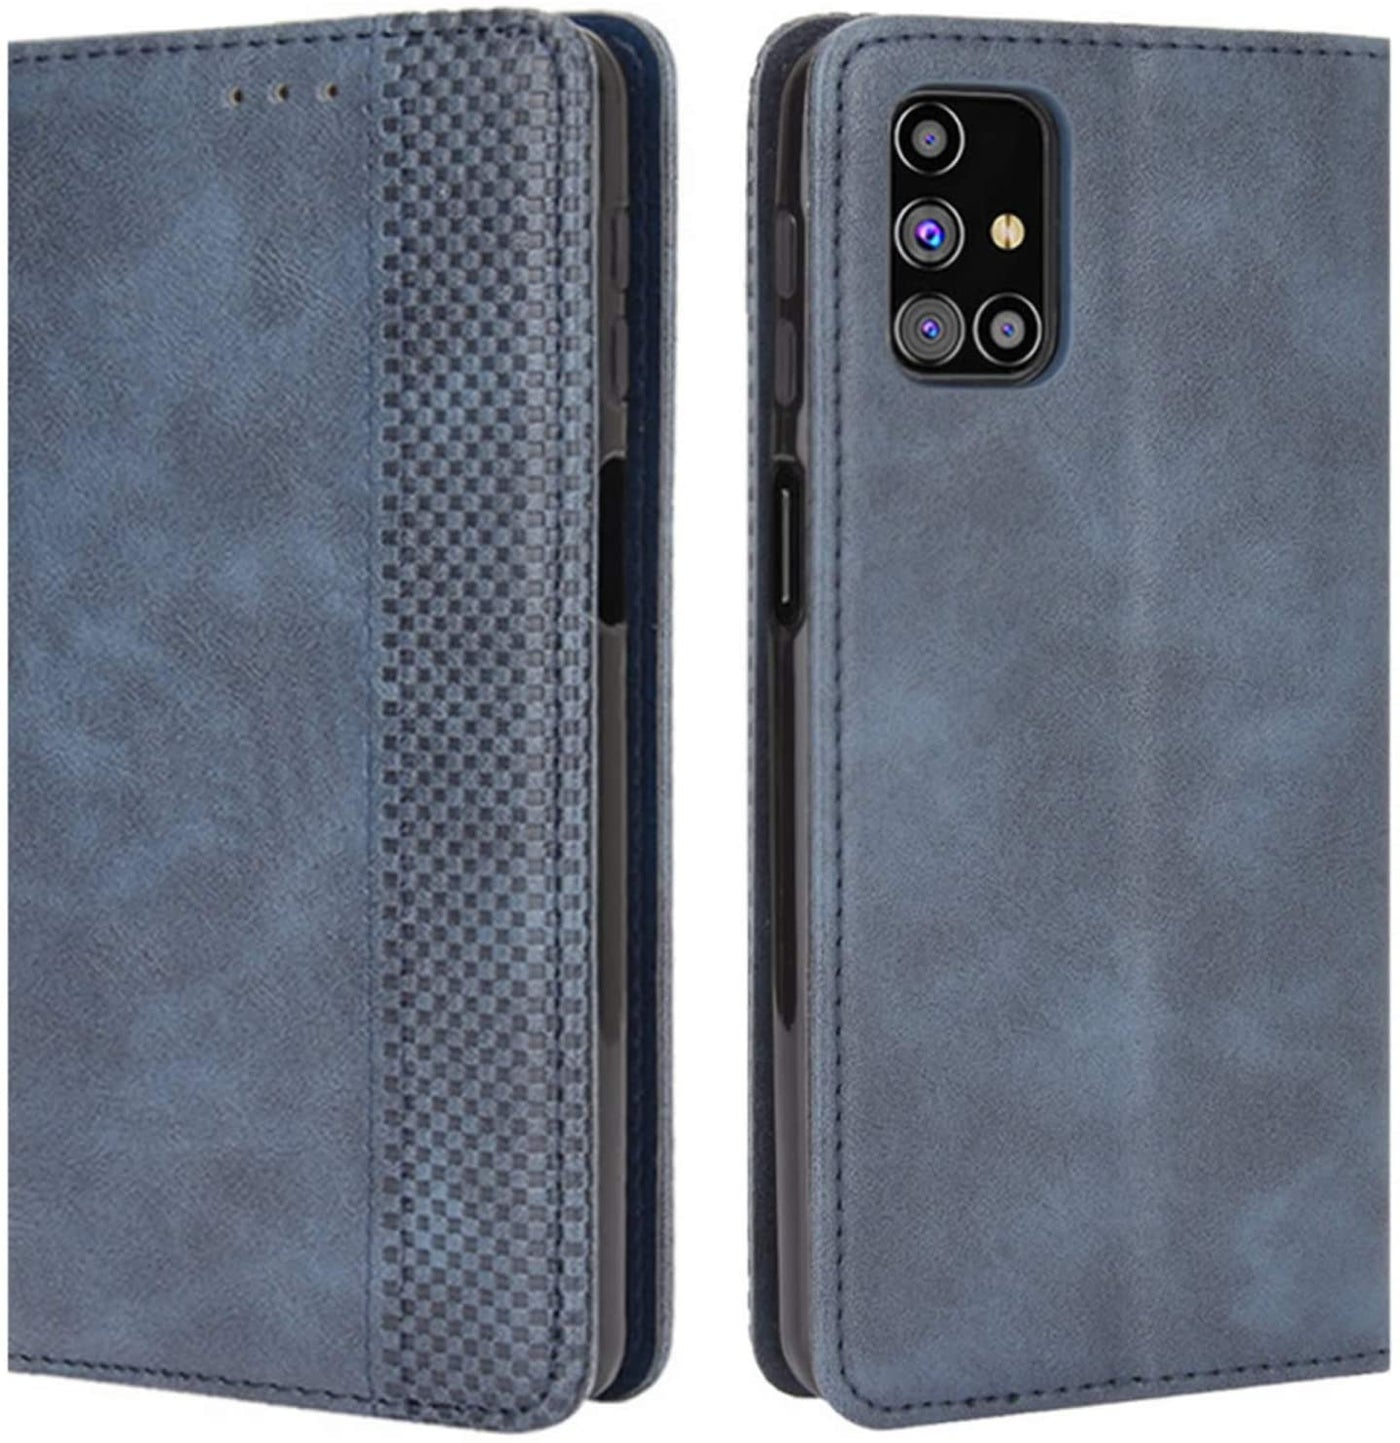 Samsung Galaxy M51 blue color leather wallet flip cover case By excelsior